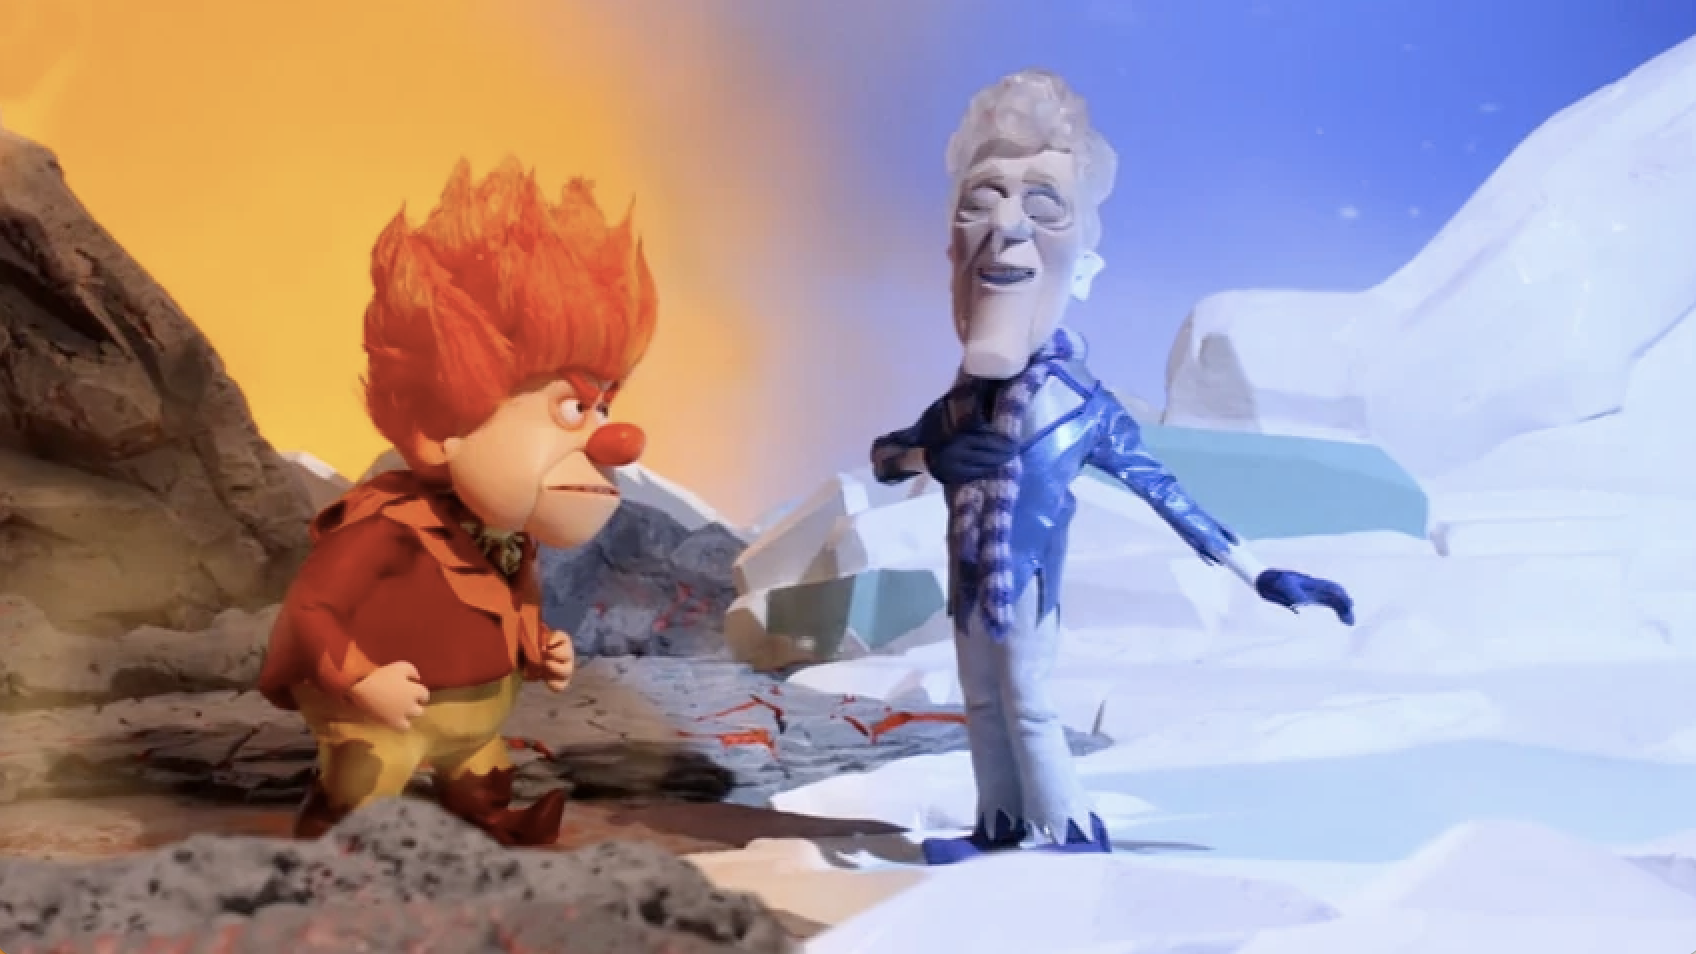 mr heat miser standing in a warm desert and mr snow miser standing on a snowy hill